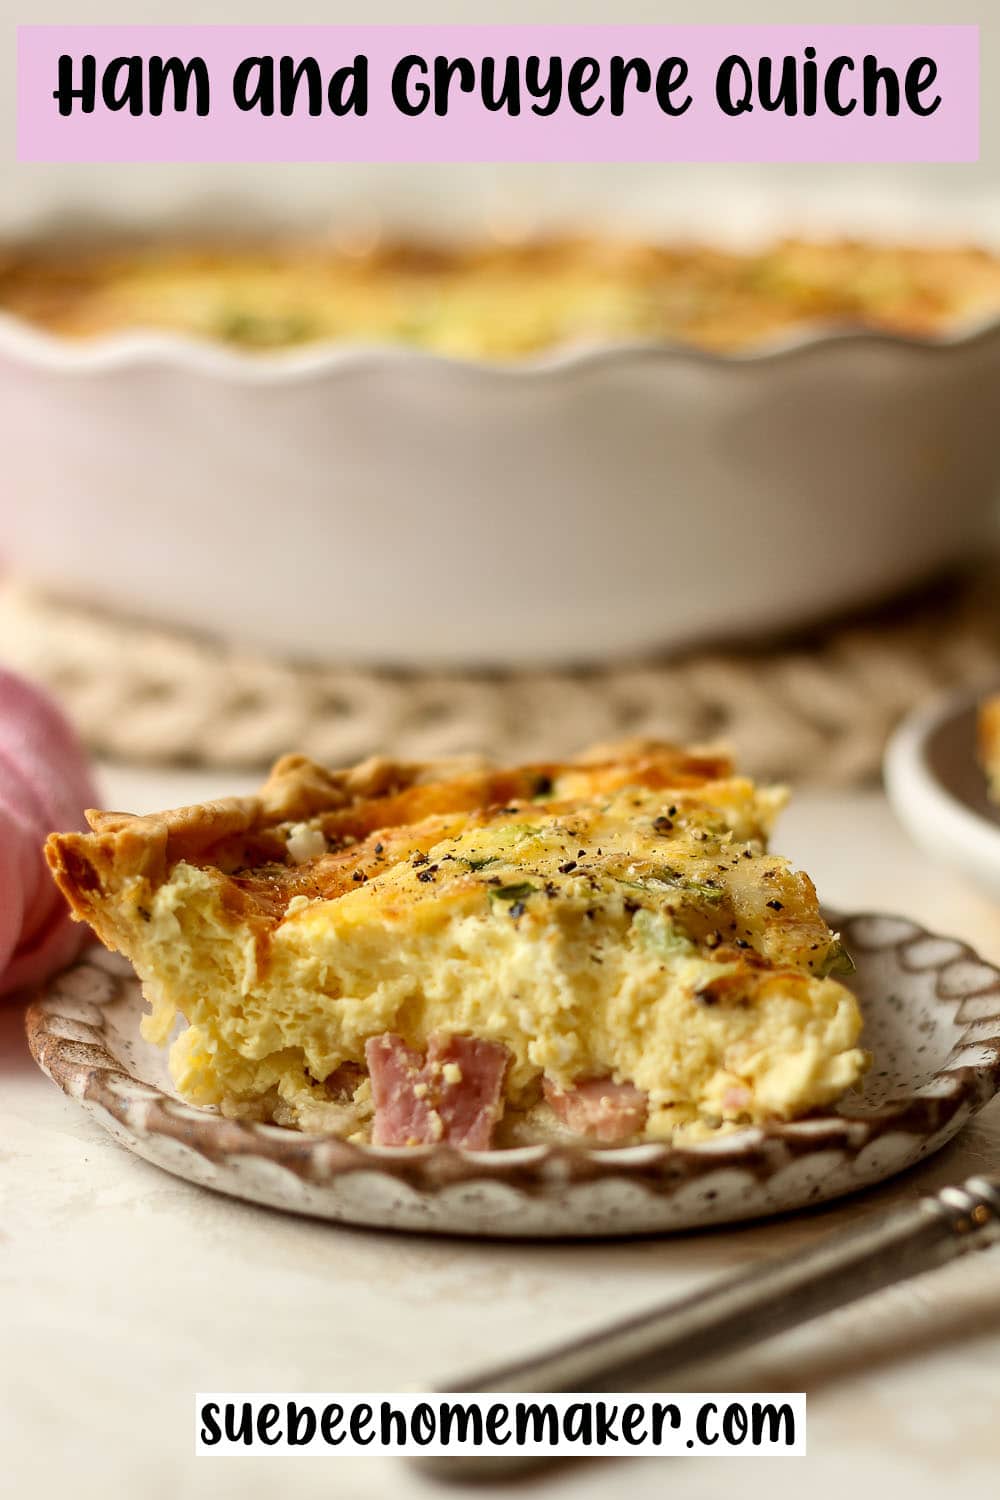 Side view of a slice of ham and gruyere quiche in front of a pie plate.